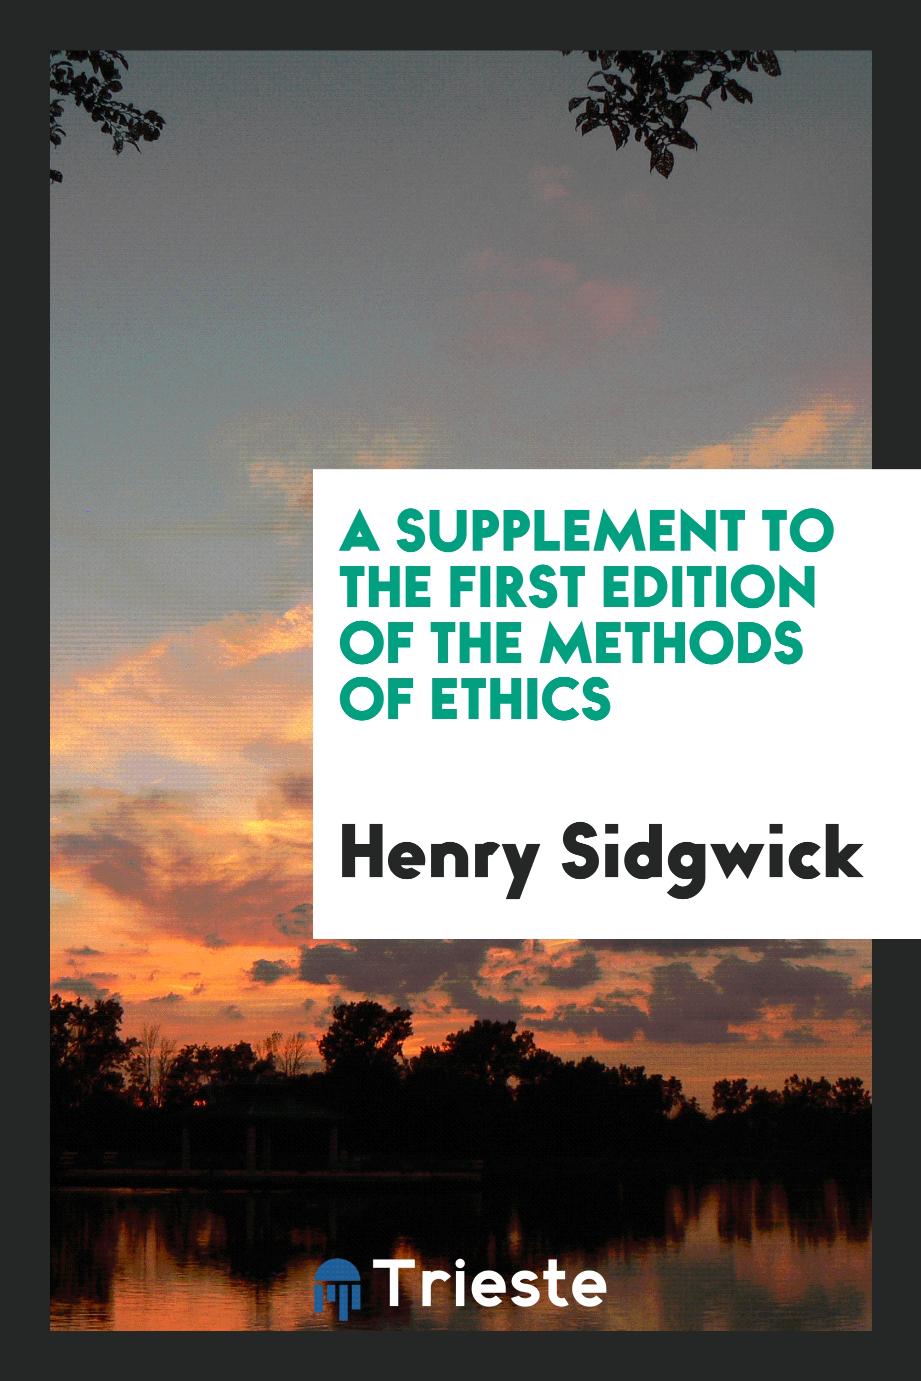 A Supplement to the First Edition of the Methods of Ethics